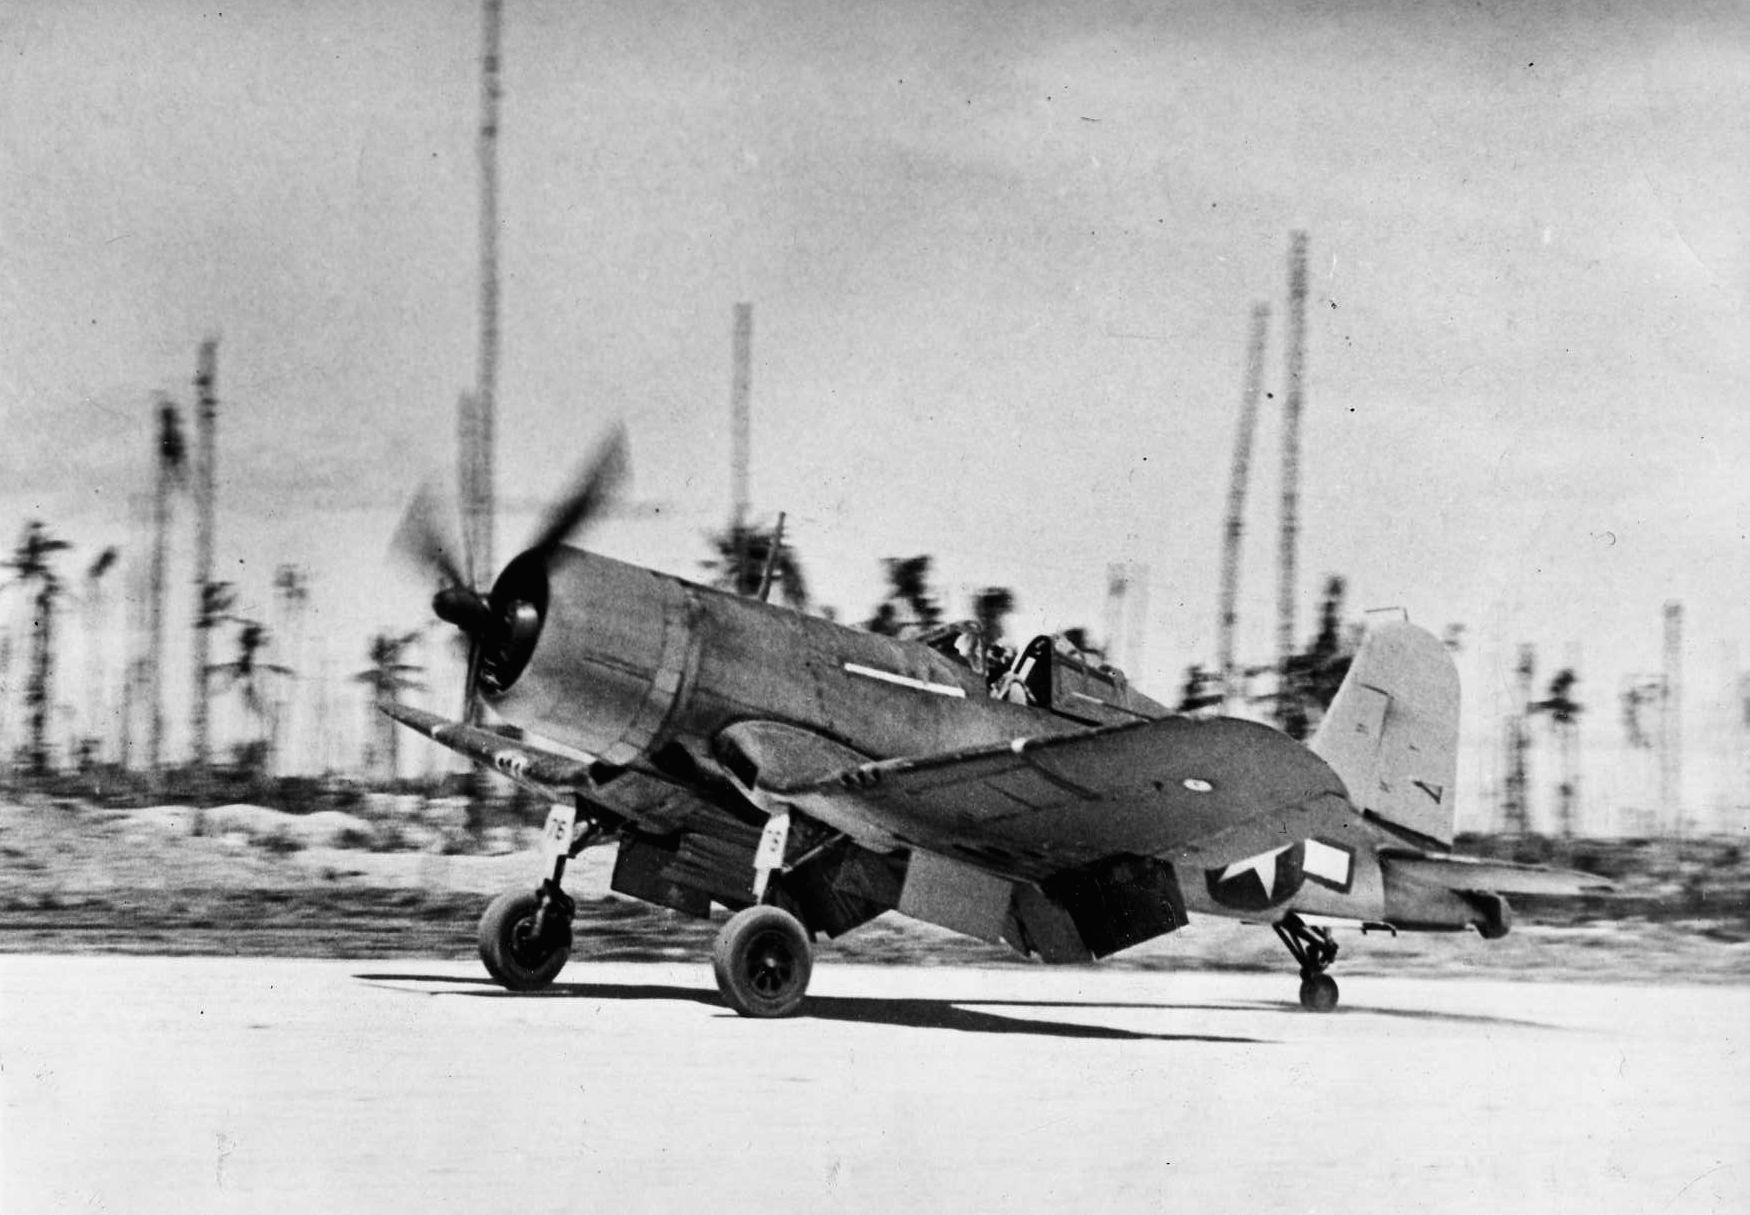 The first Allied aircraft to land after the island of New Georgia was captured from the Japanese, a U.S. Navy F4U Corsair fighter touches down on a newly operational airfield. (National Archives)